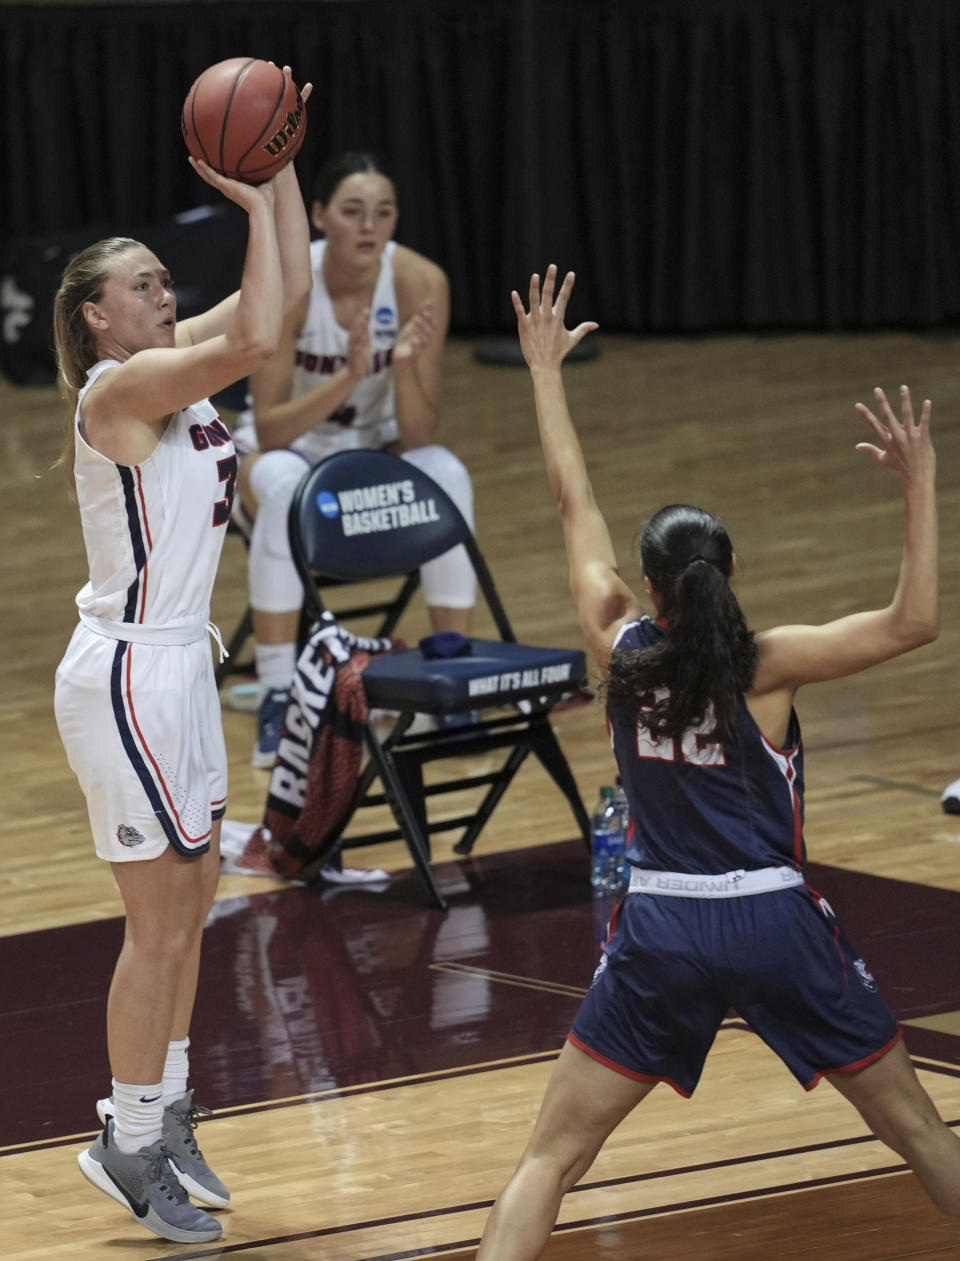 Gonzaga's Jill Townsend shoots as Belmont's Maddie Cook (22) defends during the second half of a college basketball game in the first round of the NCAA women's tournament at University Events Center in San Marcos, Texas, Monday, March 22, 2021. (AP Photo/Chuck Burton)